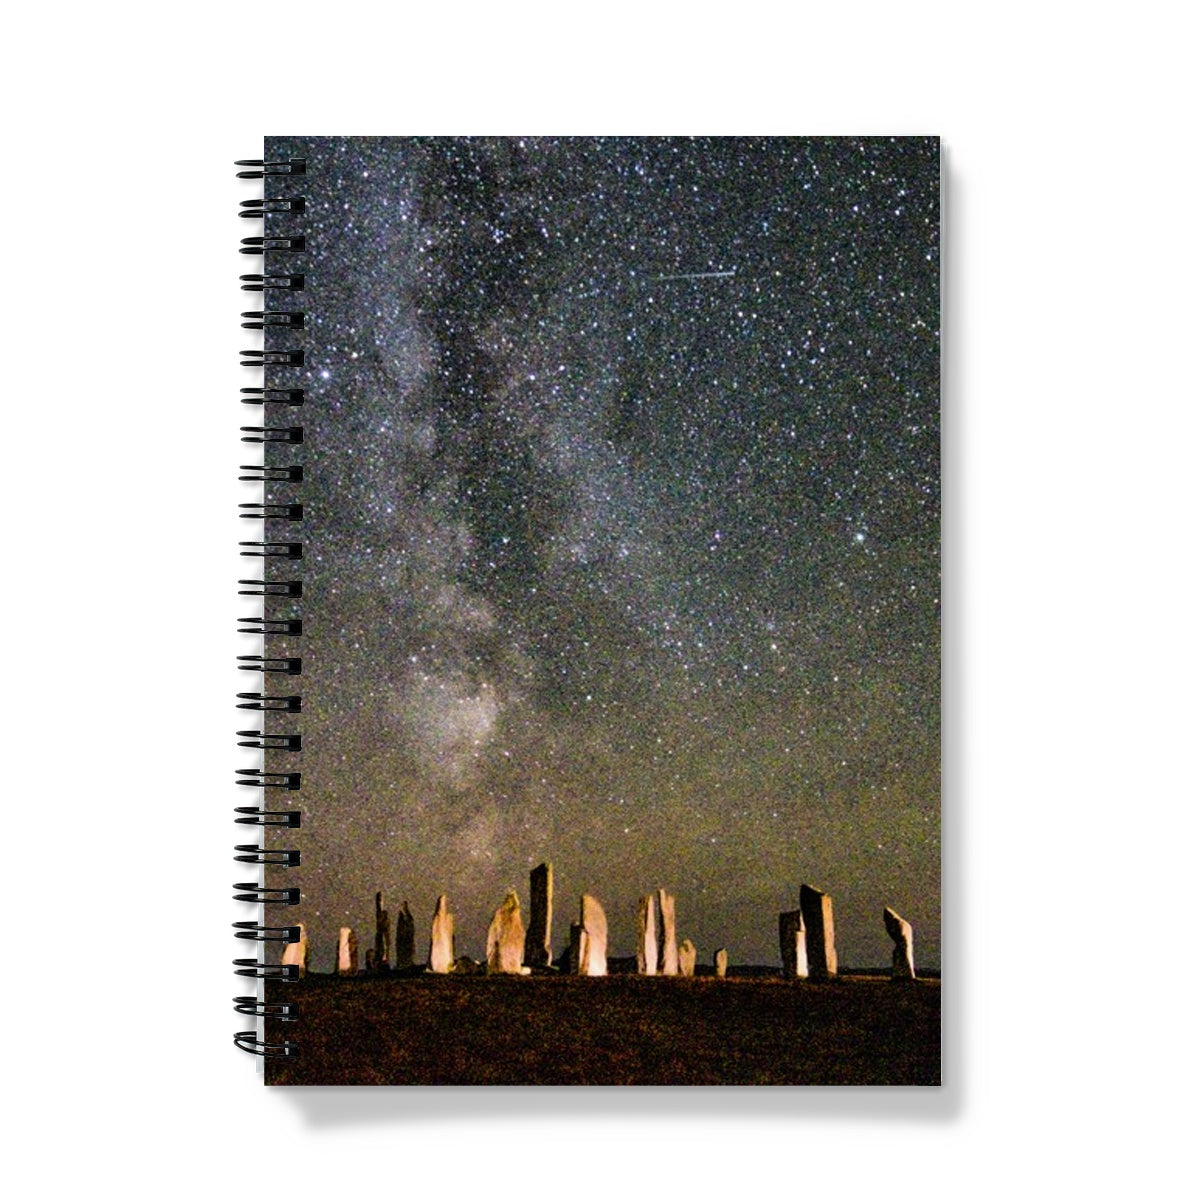 Callanish and the Milky Way  Notebook